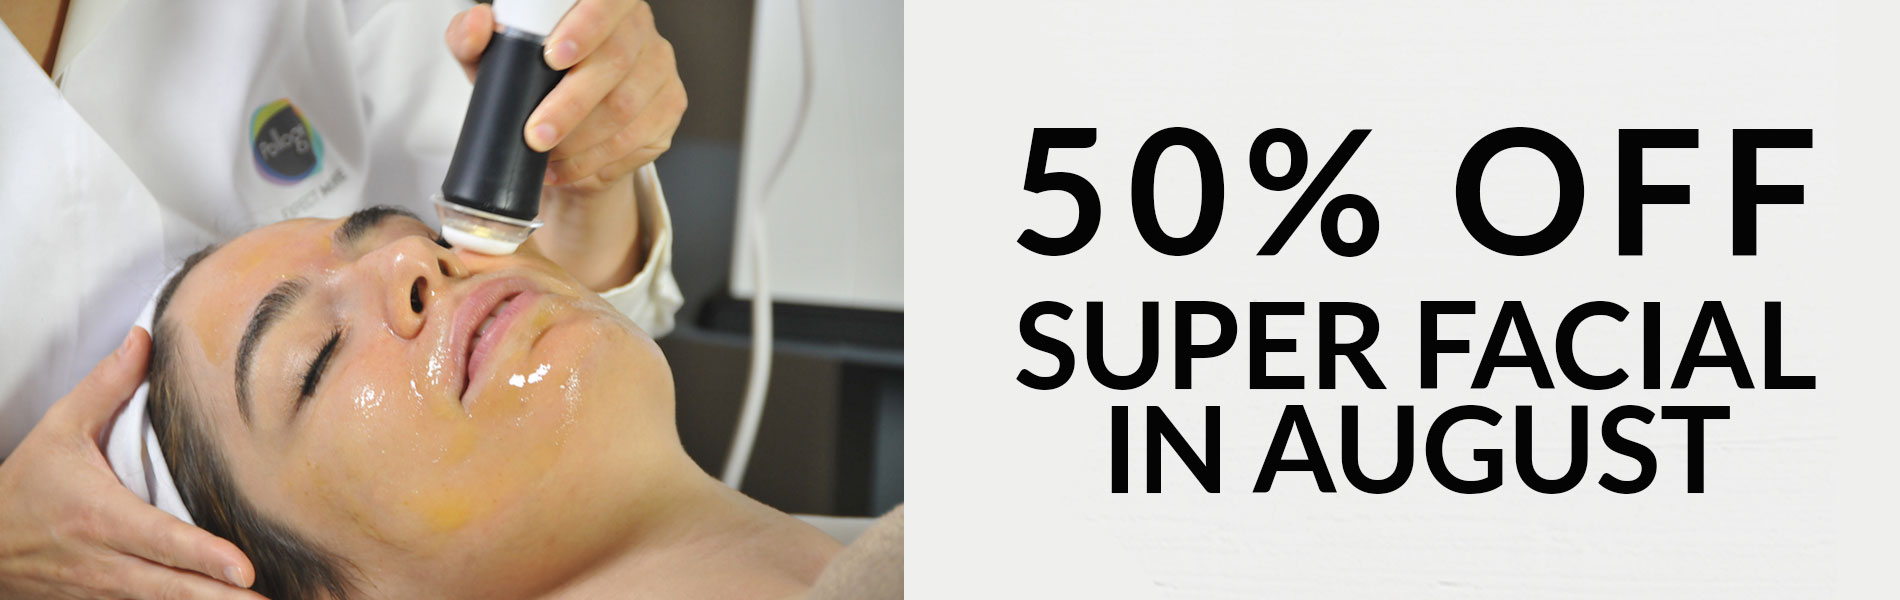 Summer Promotion – 50% OFF Super Facial in August!